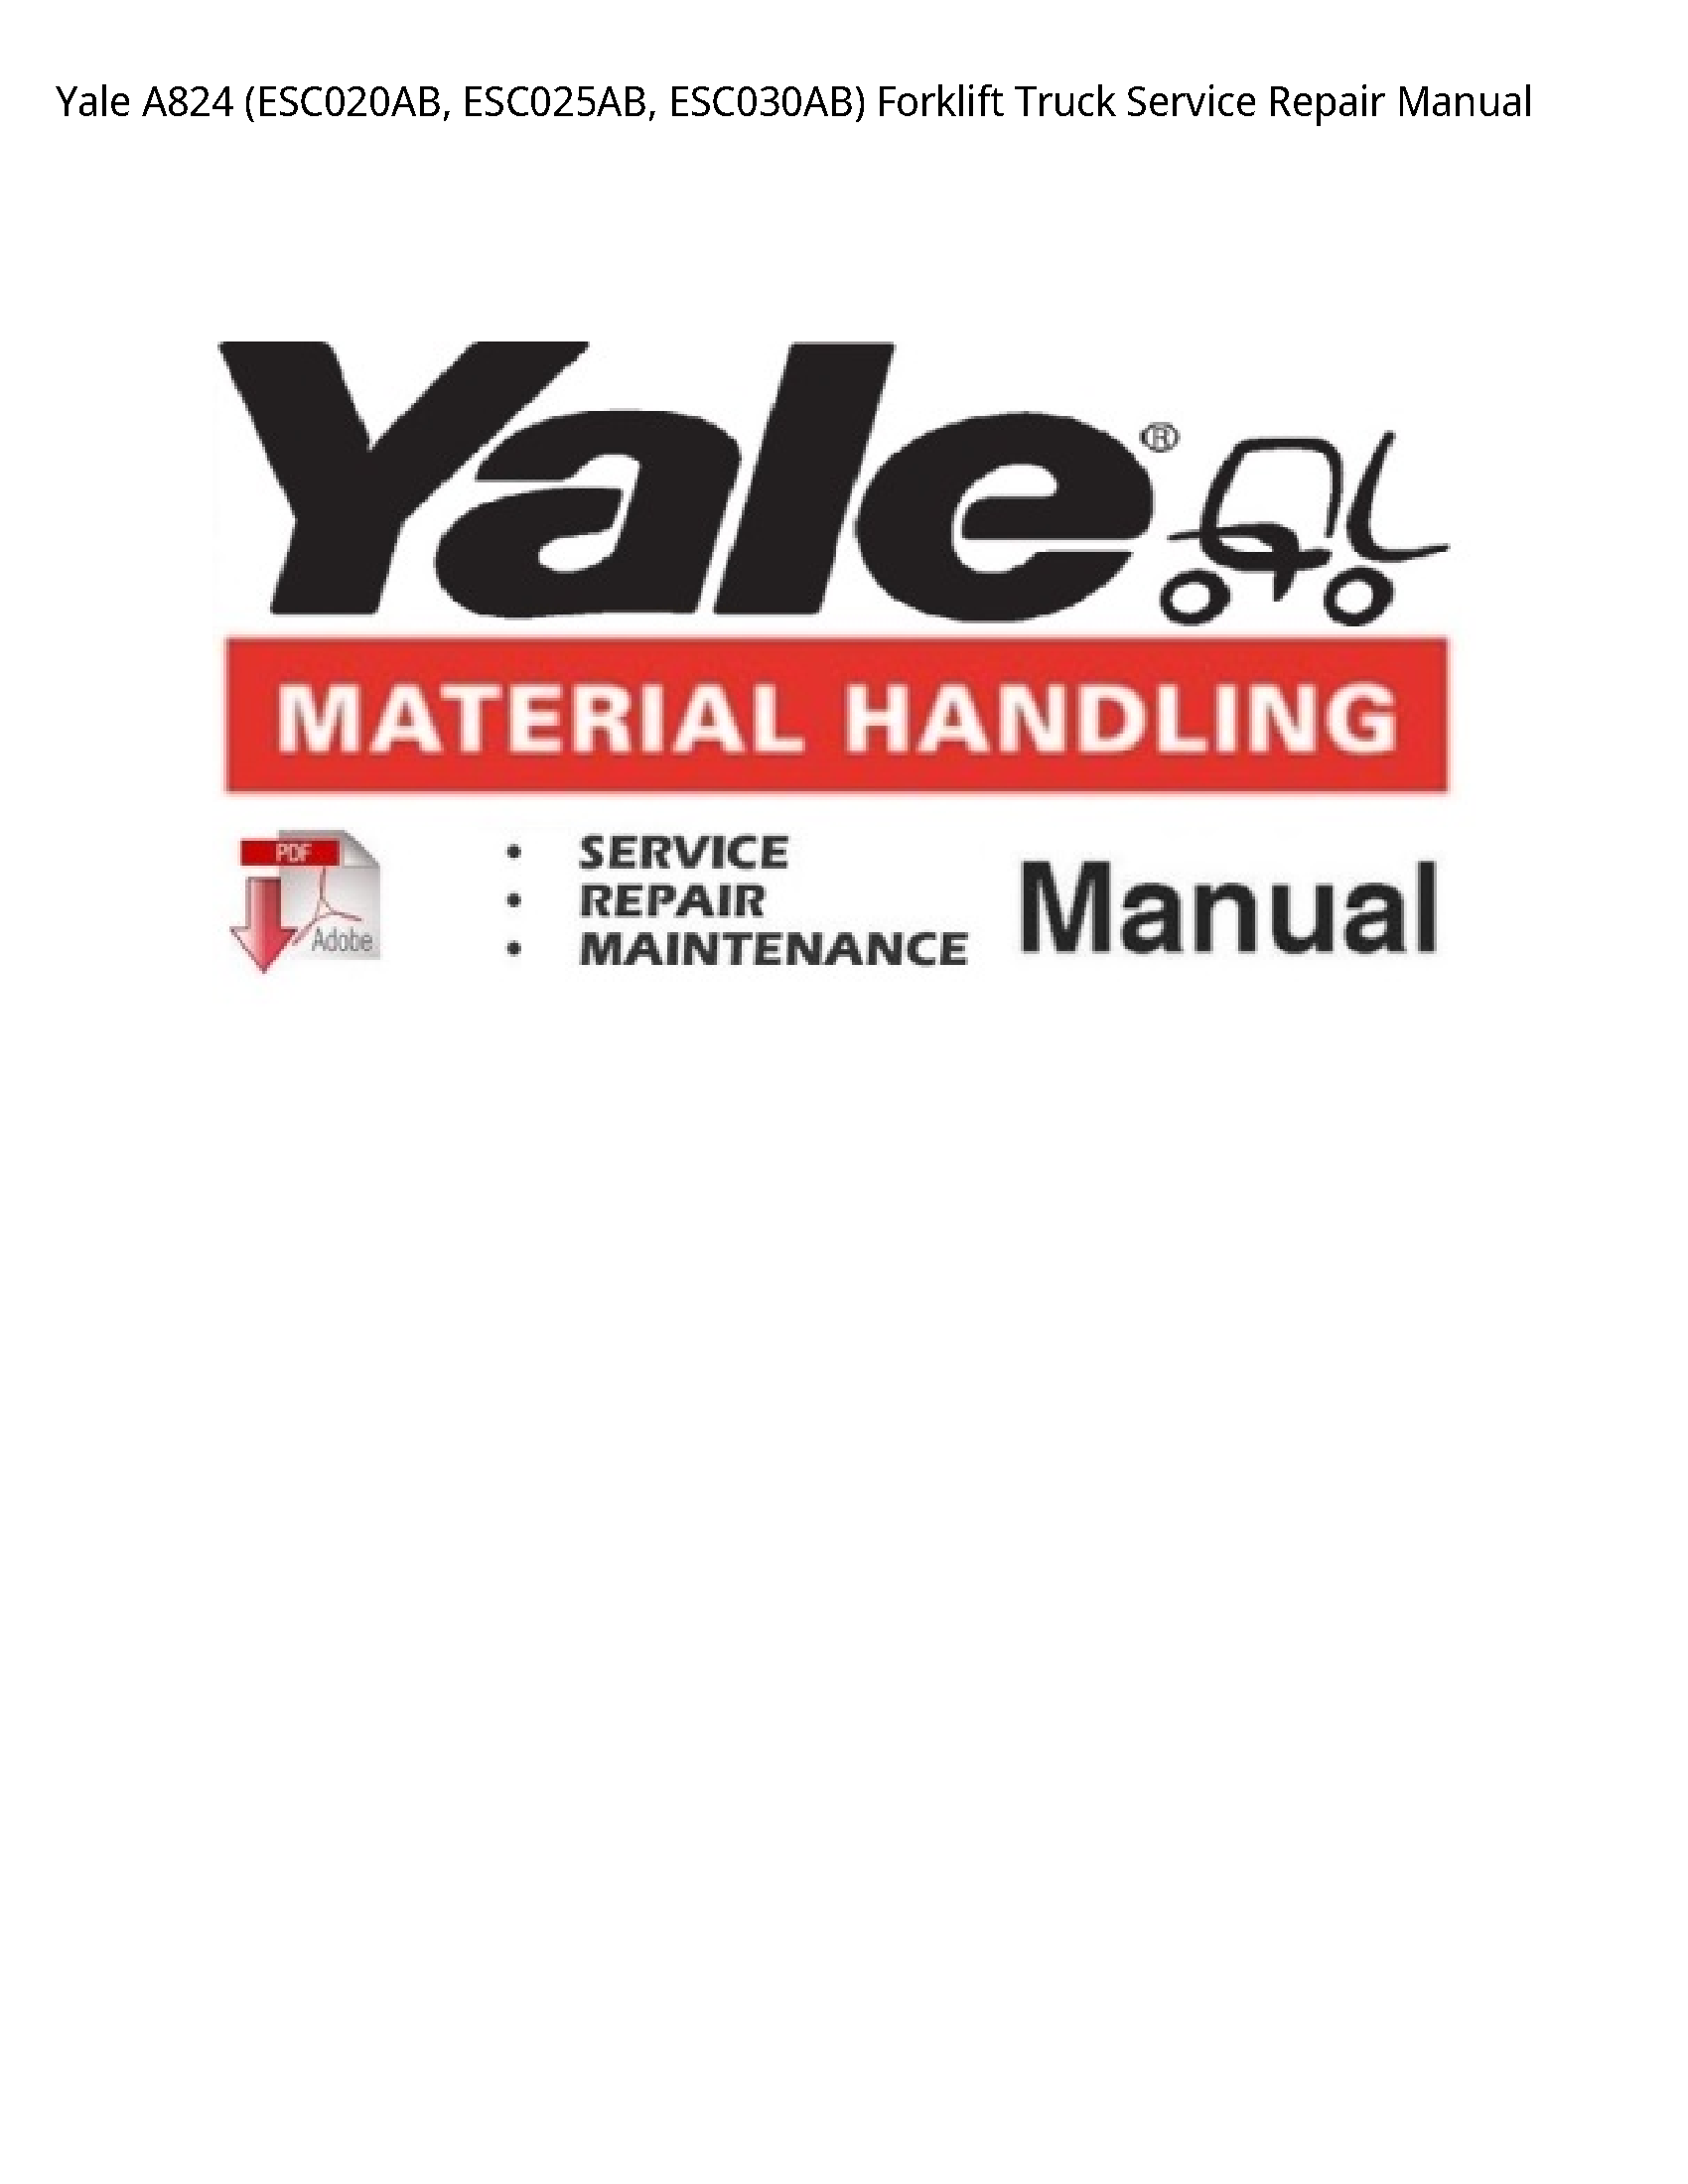 Yale A824 Forklift Truck manual